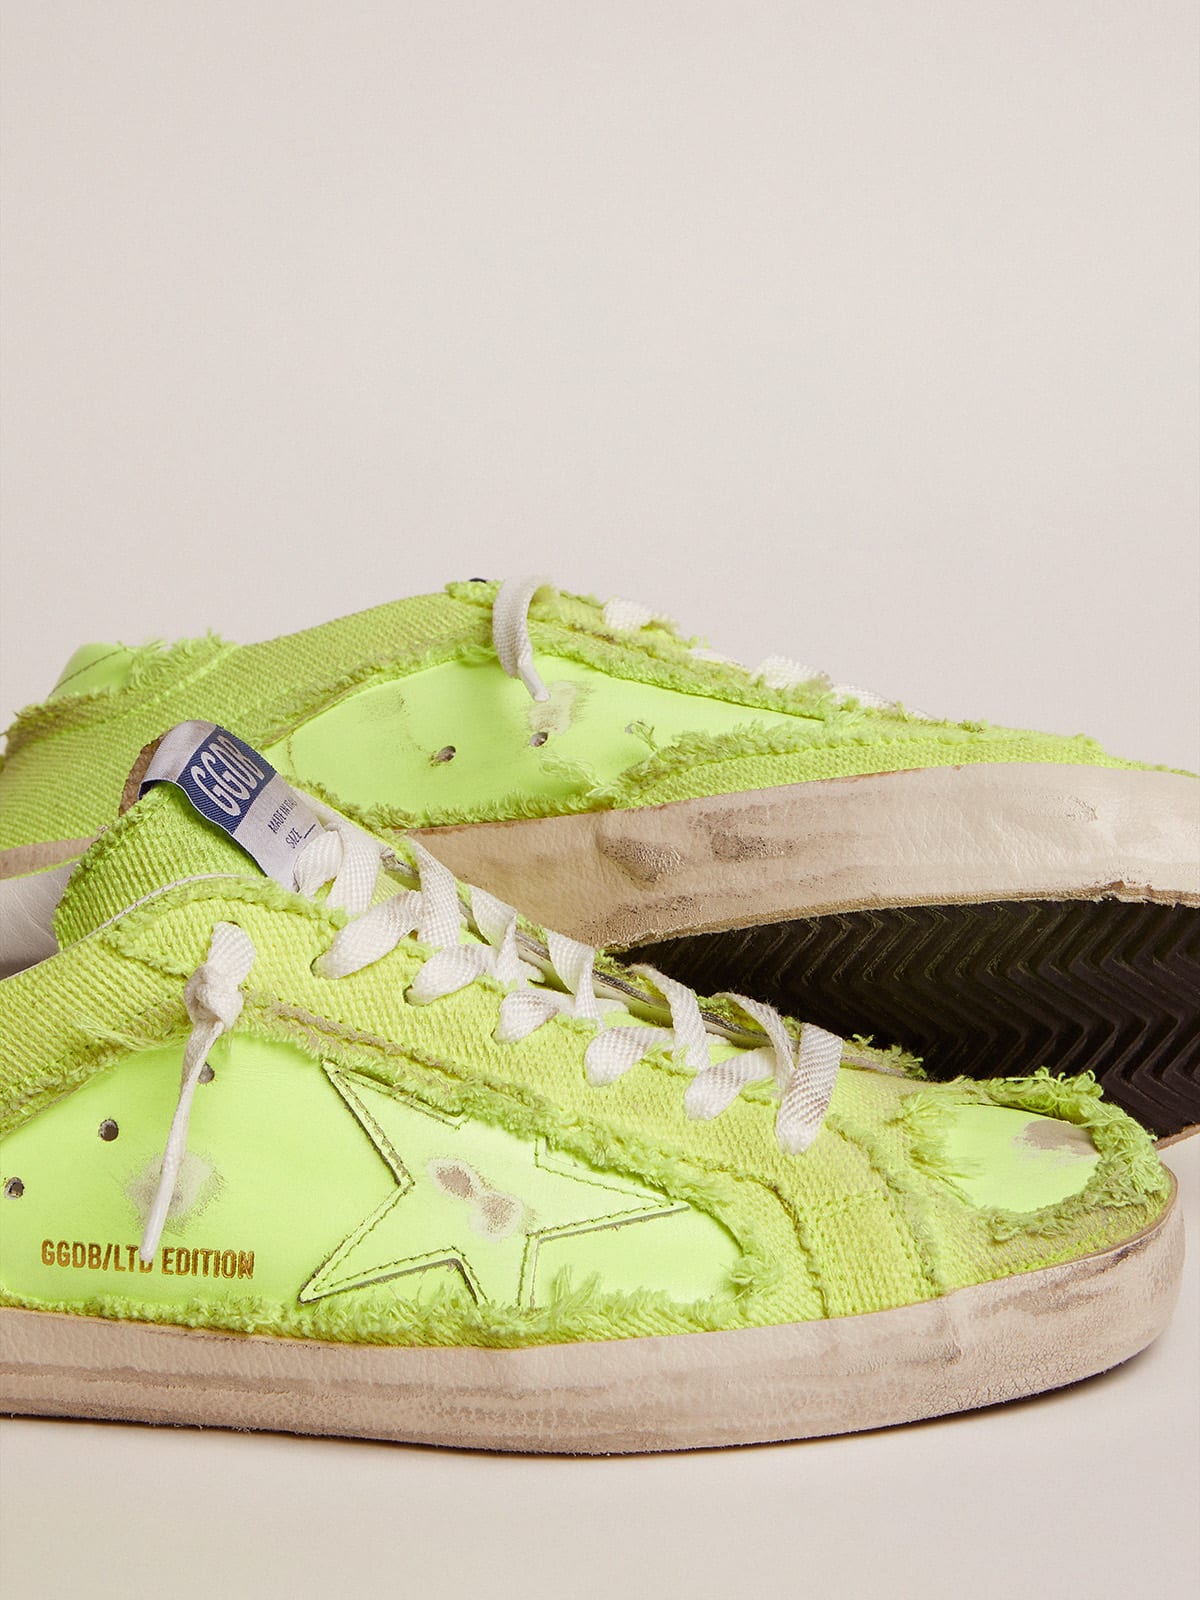 Golden Goose - Men’s Super-Star LAB sneakers in fluorescent yellow leather and canvas in 